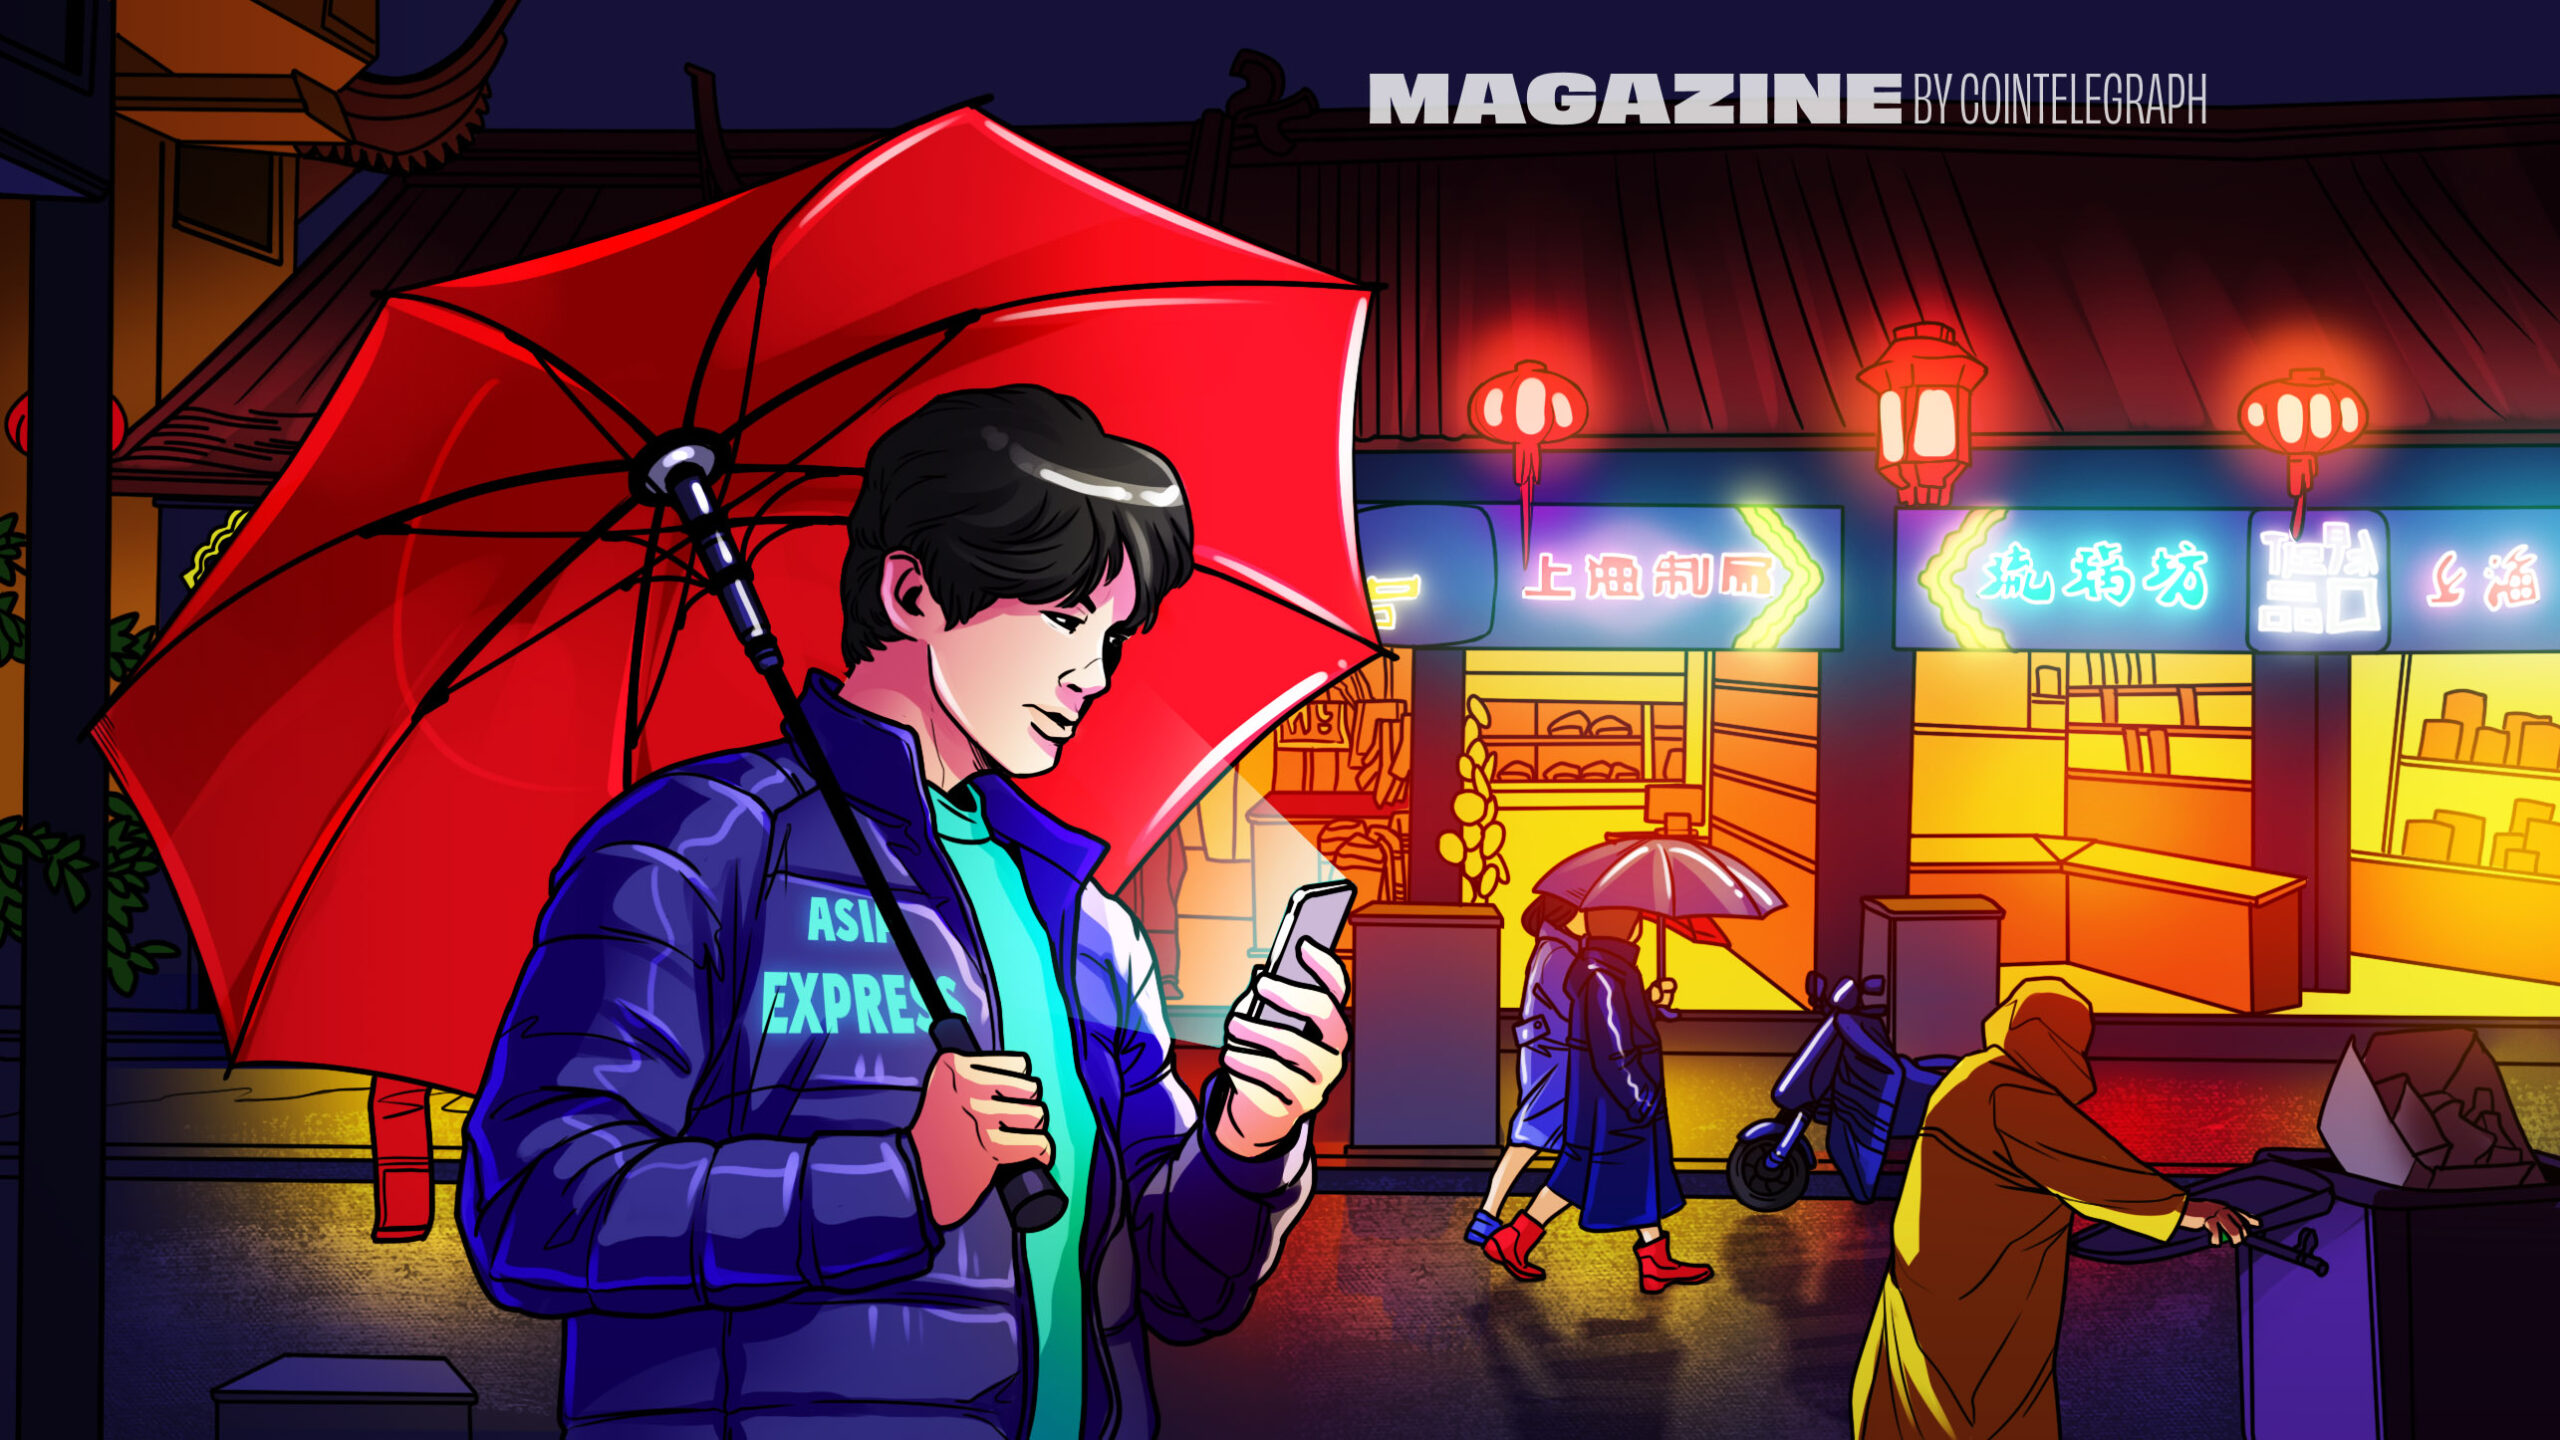 No-civil-protection-for-crypto-in-china,-$300k-to-list-coins-in-hong-kong?-asia-express